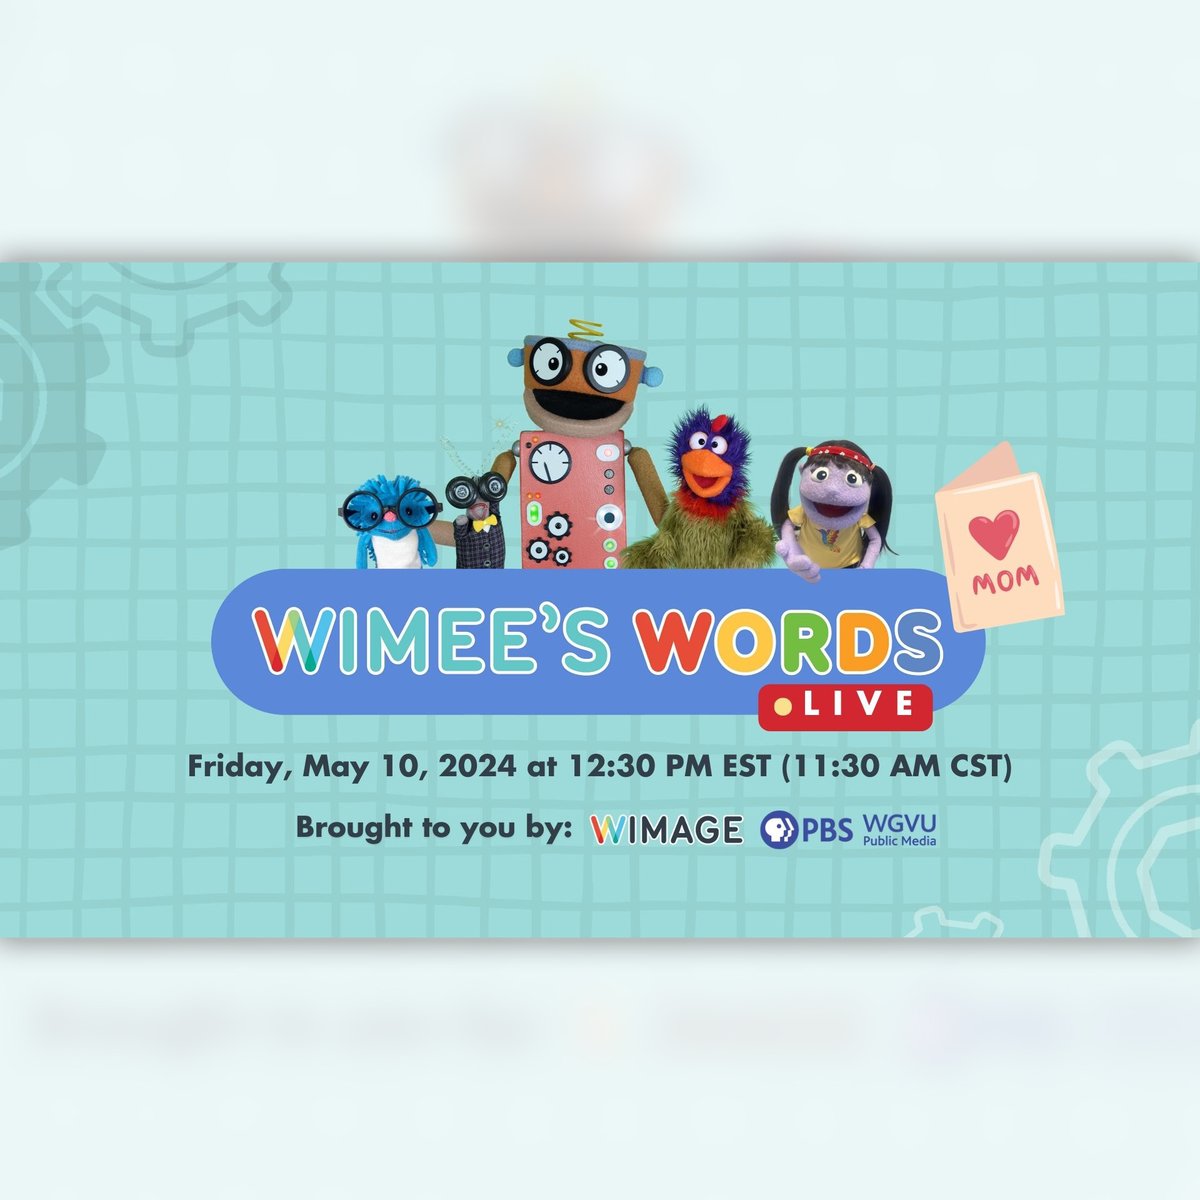 Join @Wimeetherobot: Wimee's Words LIVE on Friday, May 10! Wimee's Words LIVE is broadcast in REAL time on Fridays at 12:30 PM on WGVU Public Media (on tv and online) and also at wimee.tv!